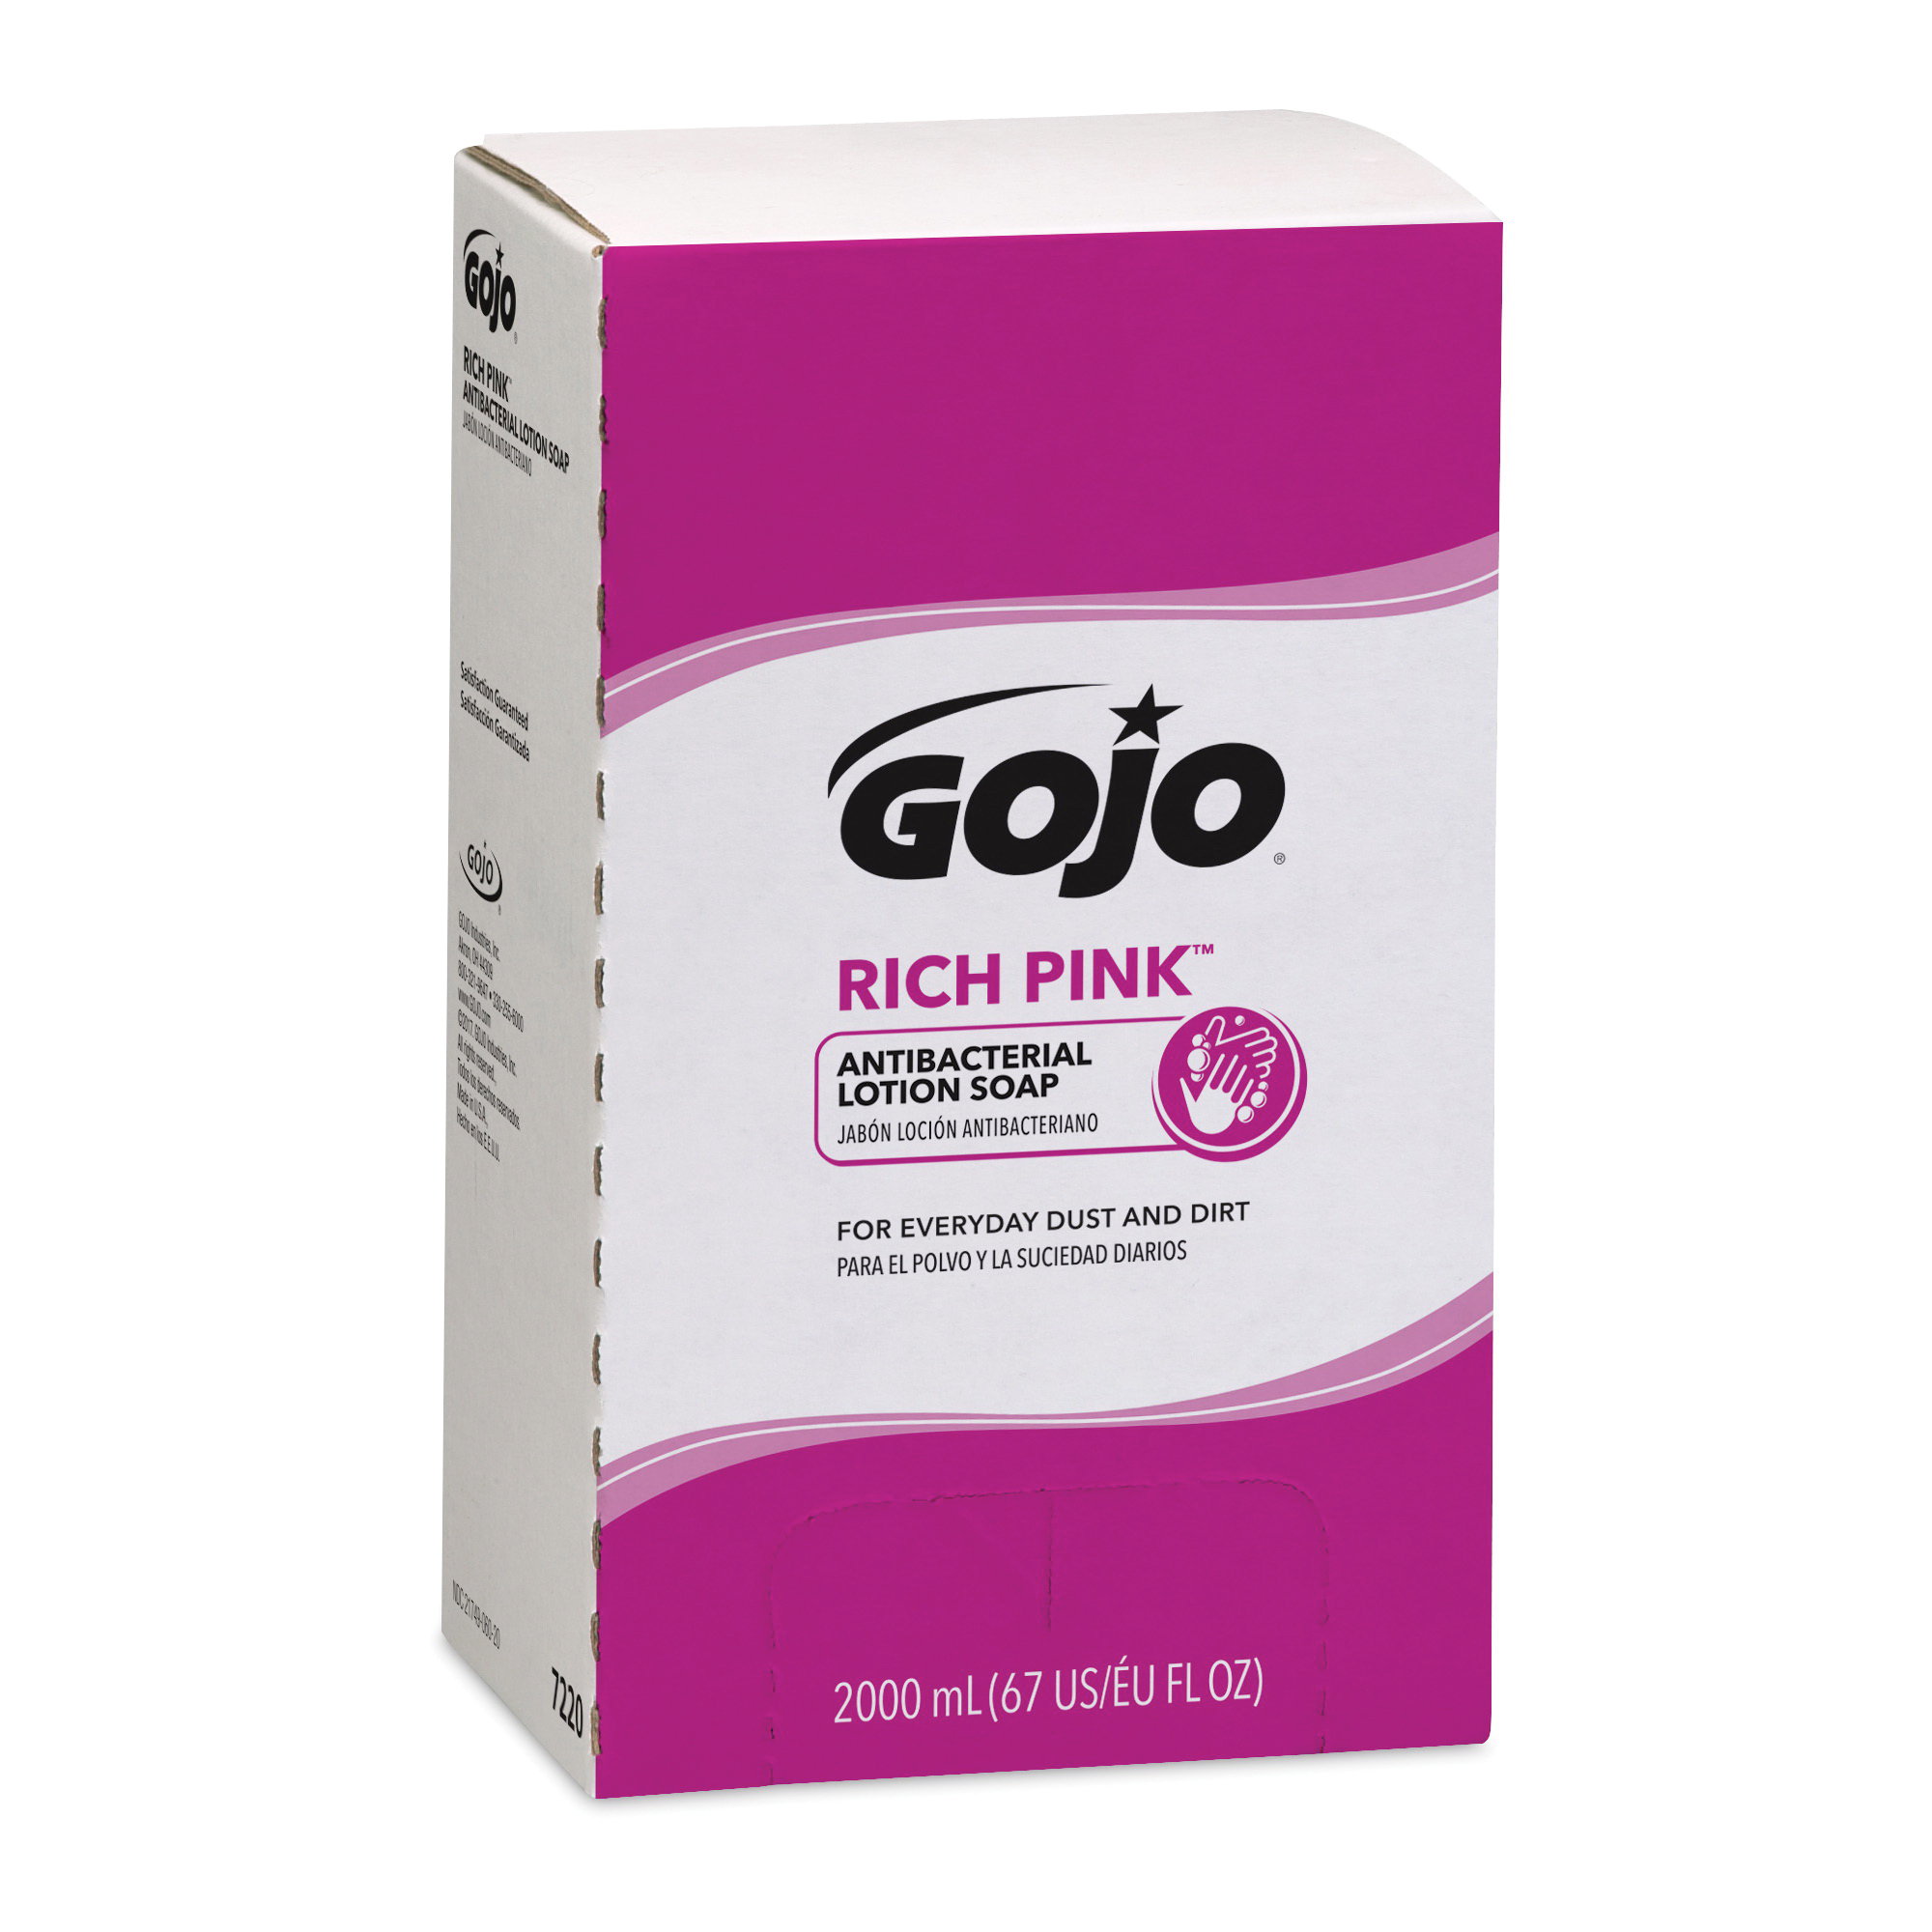 GOJO® 5162-04 Luxury Antibacterial Hand Wash, 1250 mL Nominal, Dispenser Refill Package, Foam Form, Floral/Like Fruit Odor/Scent, Amber/Clear/Translucent/Yellow Orange